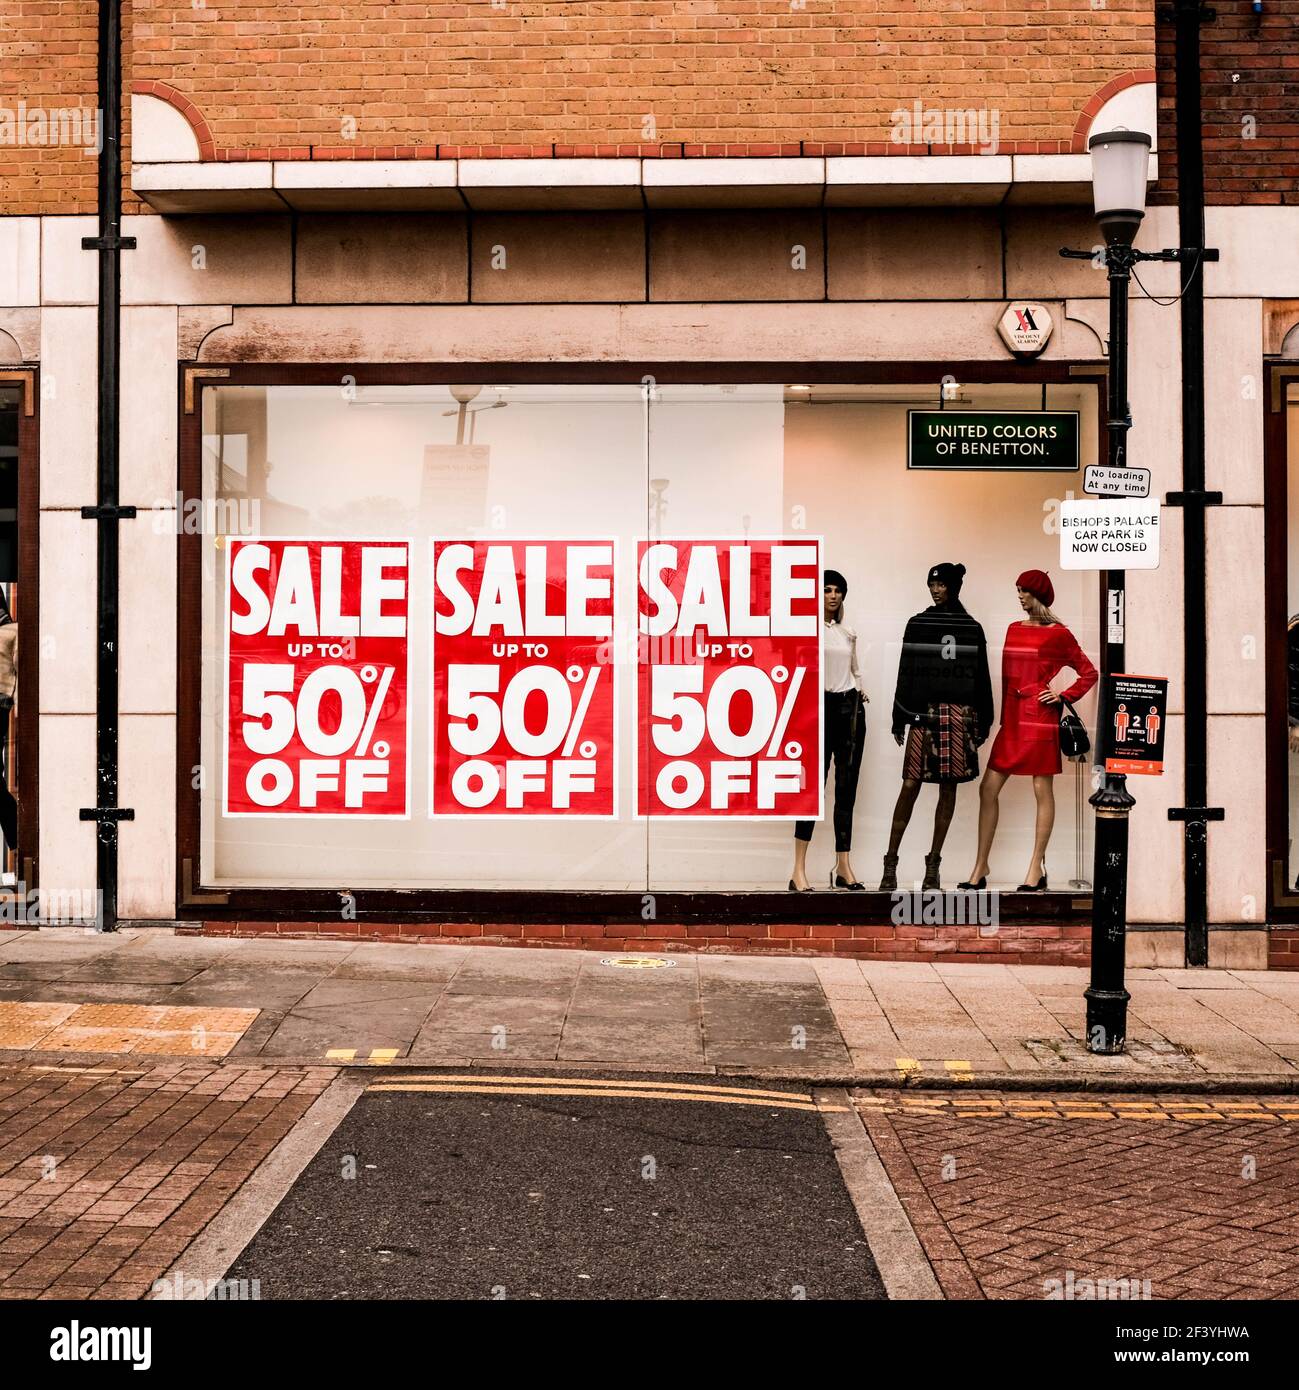 London UK, March 18 2021, United Colours Of Benetton Retail Shop Sale Signs  in Window Stock Photo - Alamy